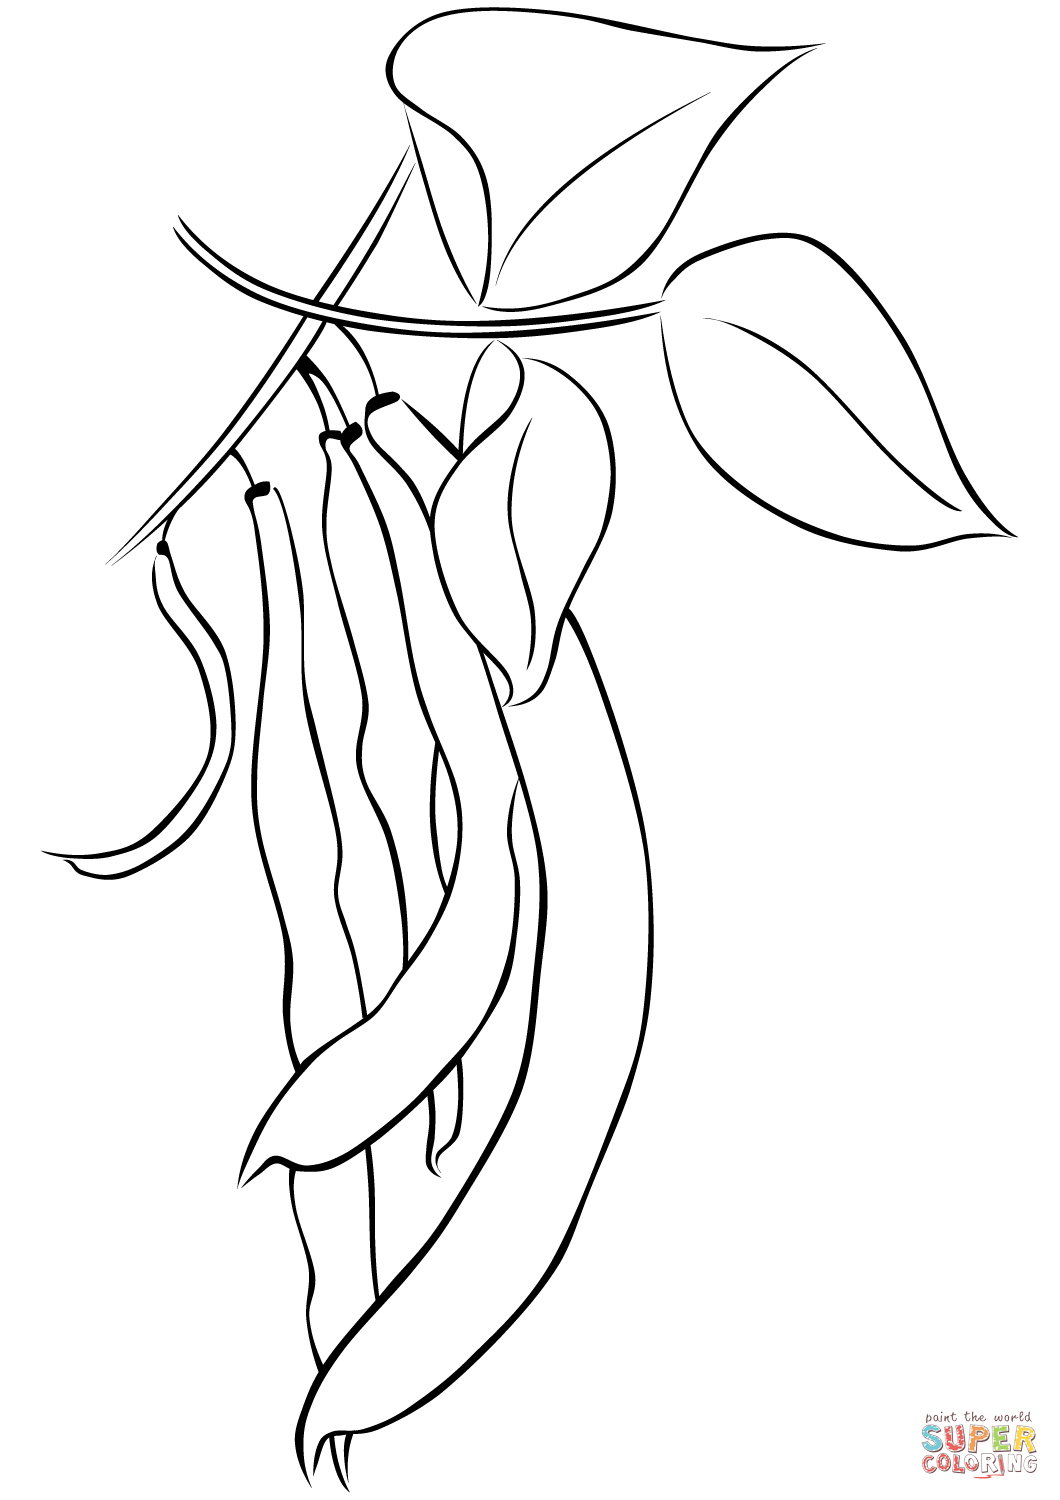 Green Beans Coloring Page Beans Coloring Page Free Printable Coloring Pages